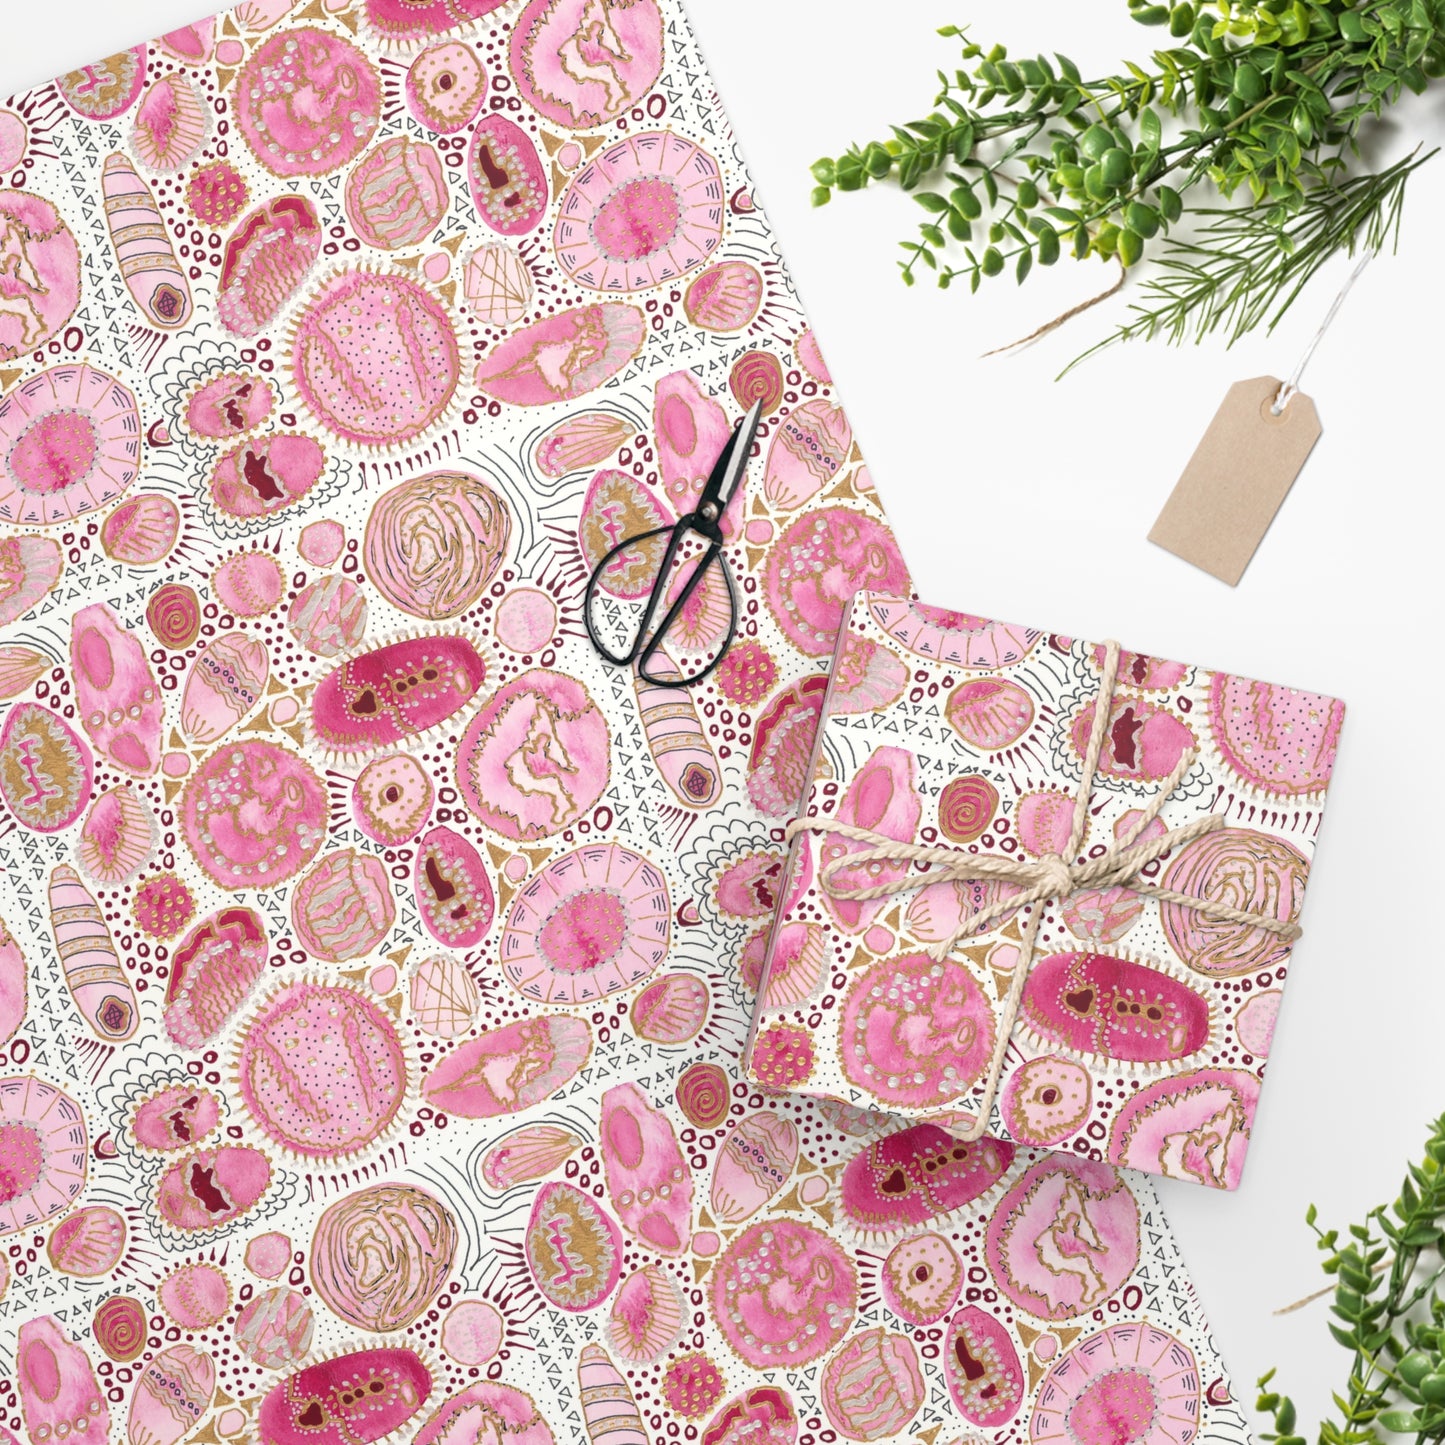 Wrapping Paper - "Pink Bliss Bubbles"